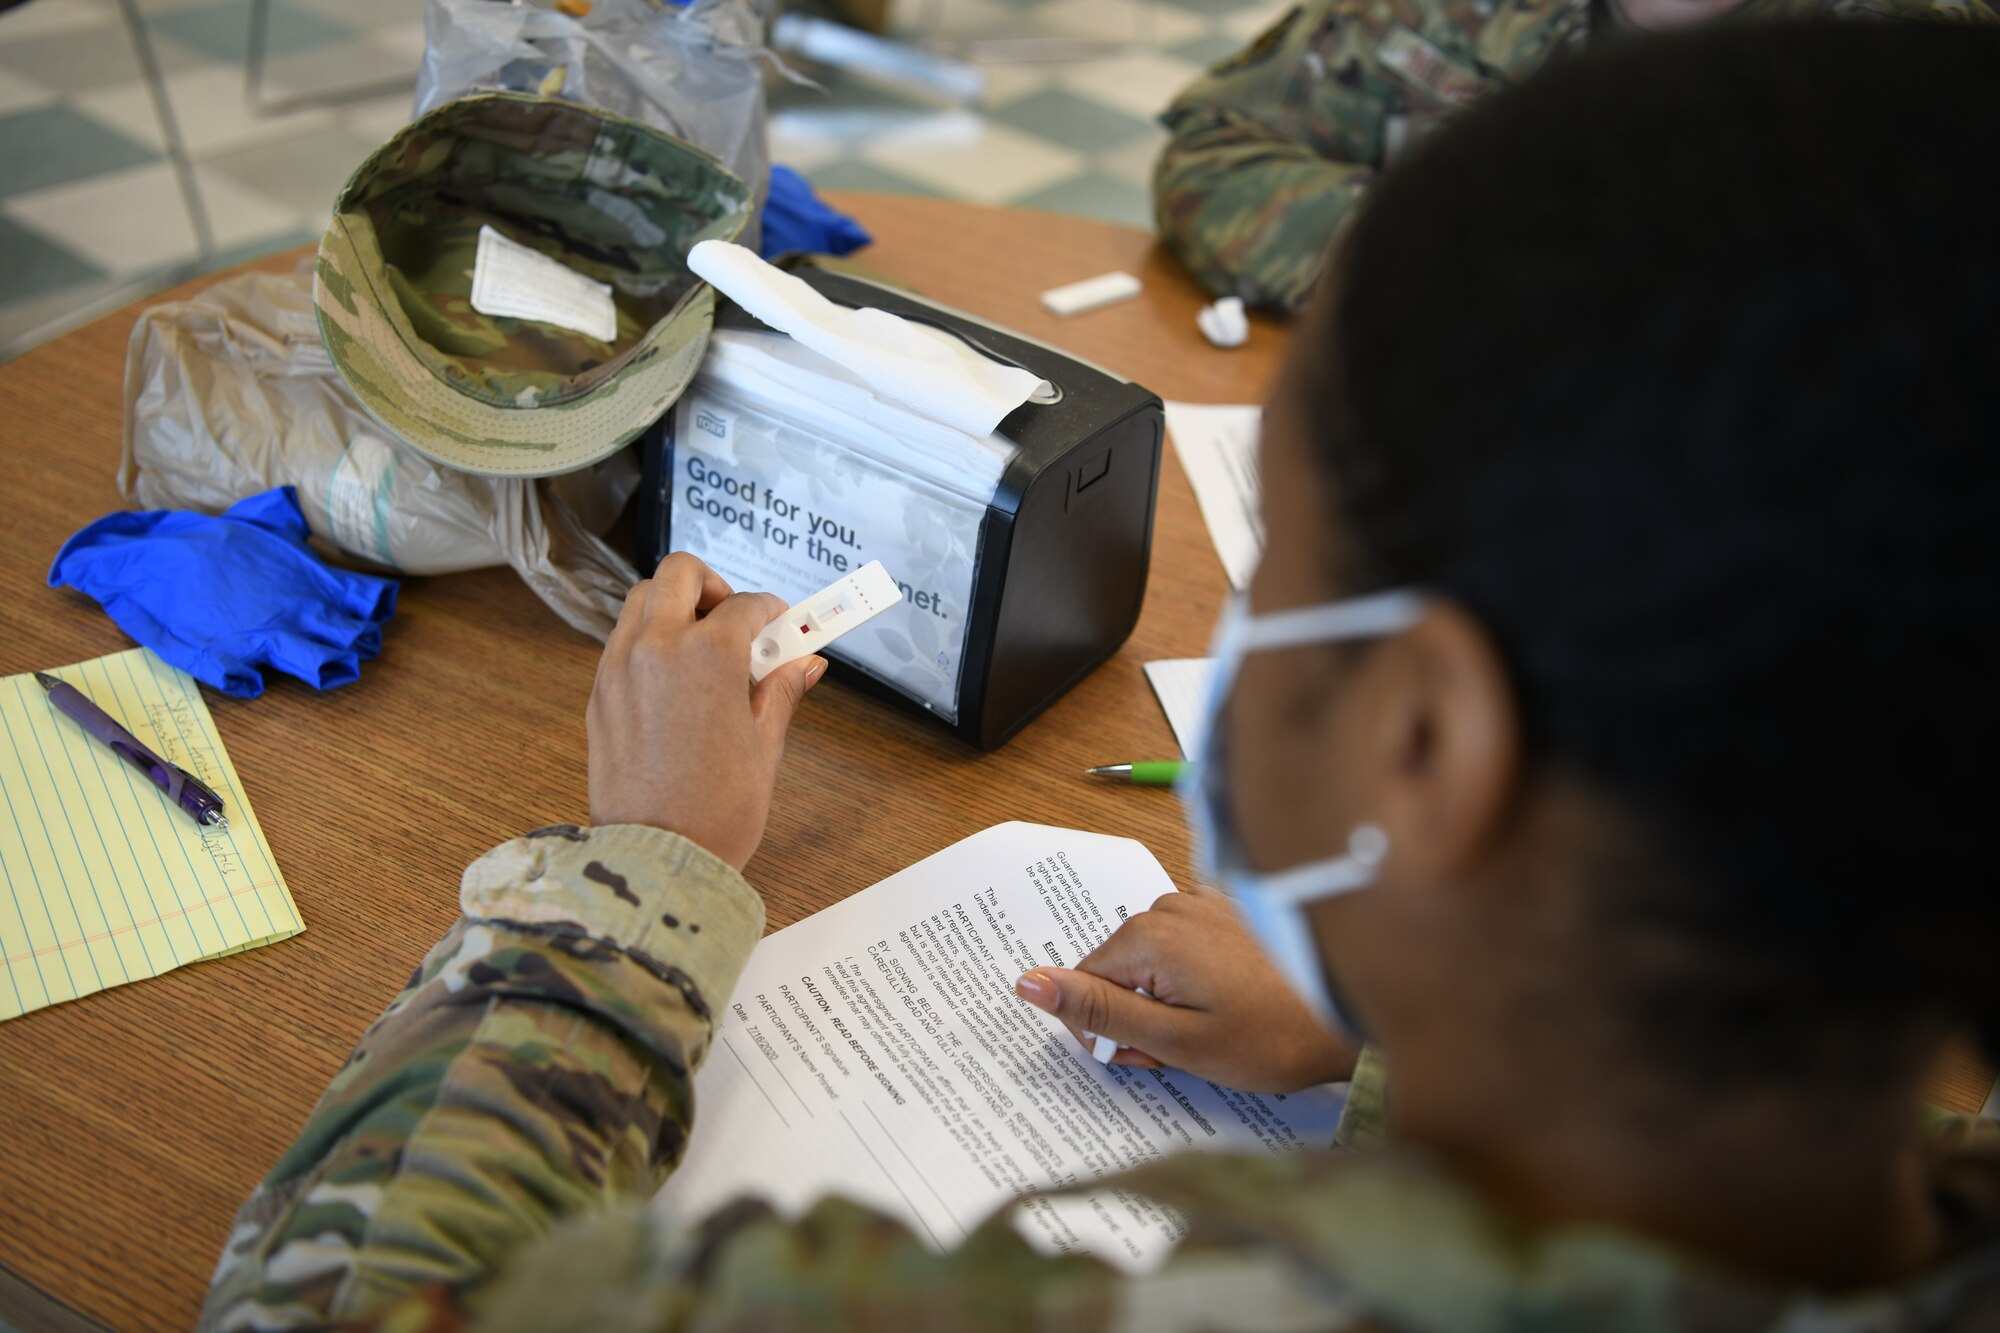 Photo shows a woman holding a test in her hand waiting on results.